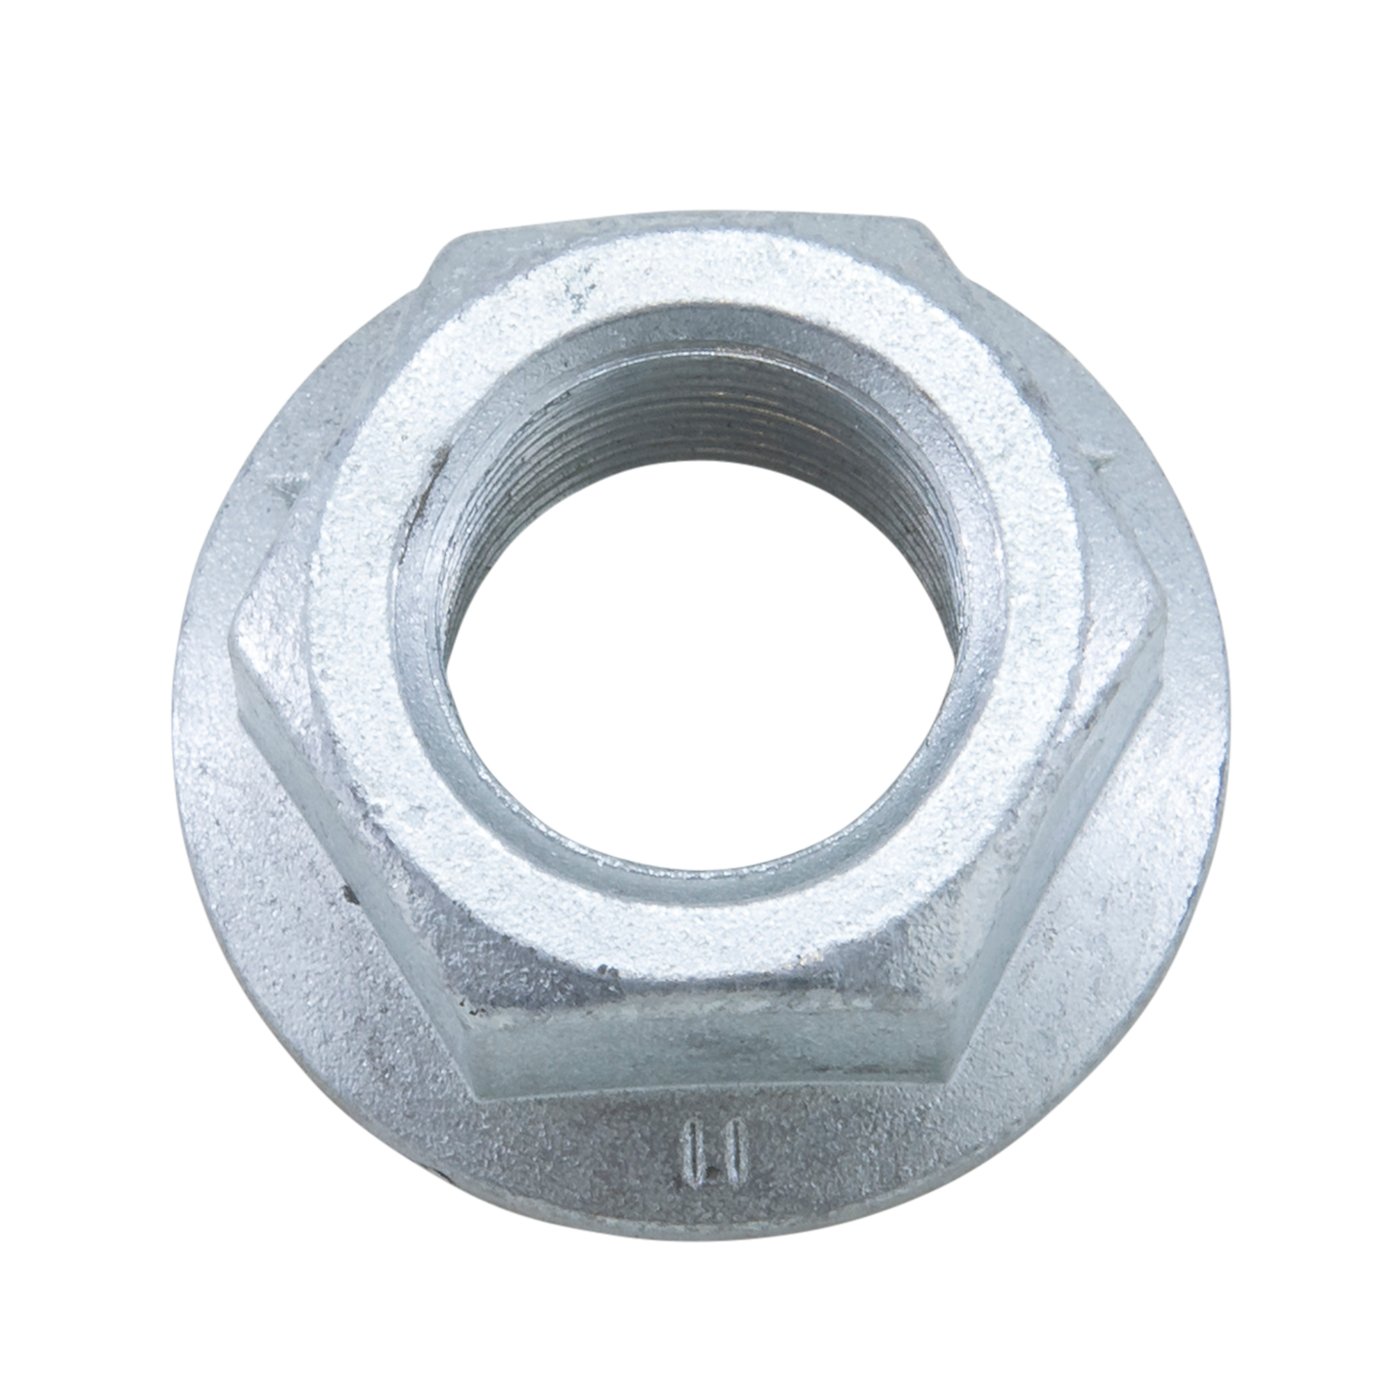 9 in. Ford Pinion Nut, 35 Spline Large Pinion Oversize.